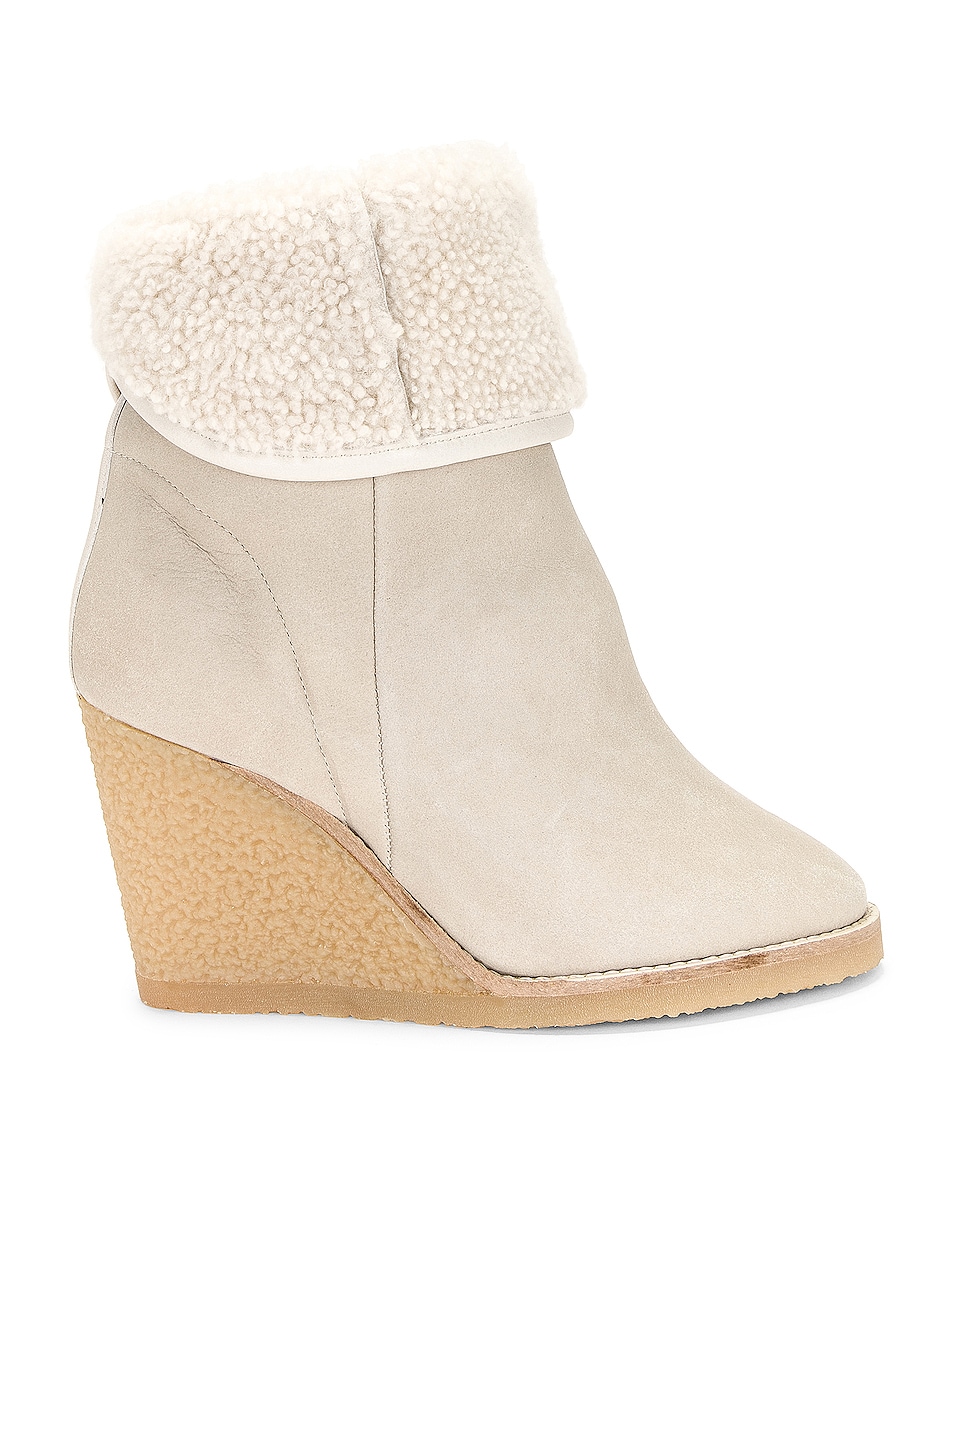 Image 1 of Isabel Marant Totam Shearling Boot in Beige